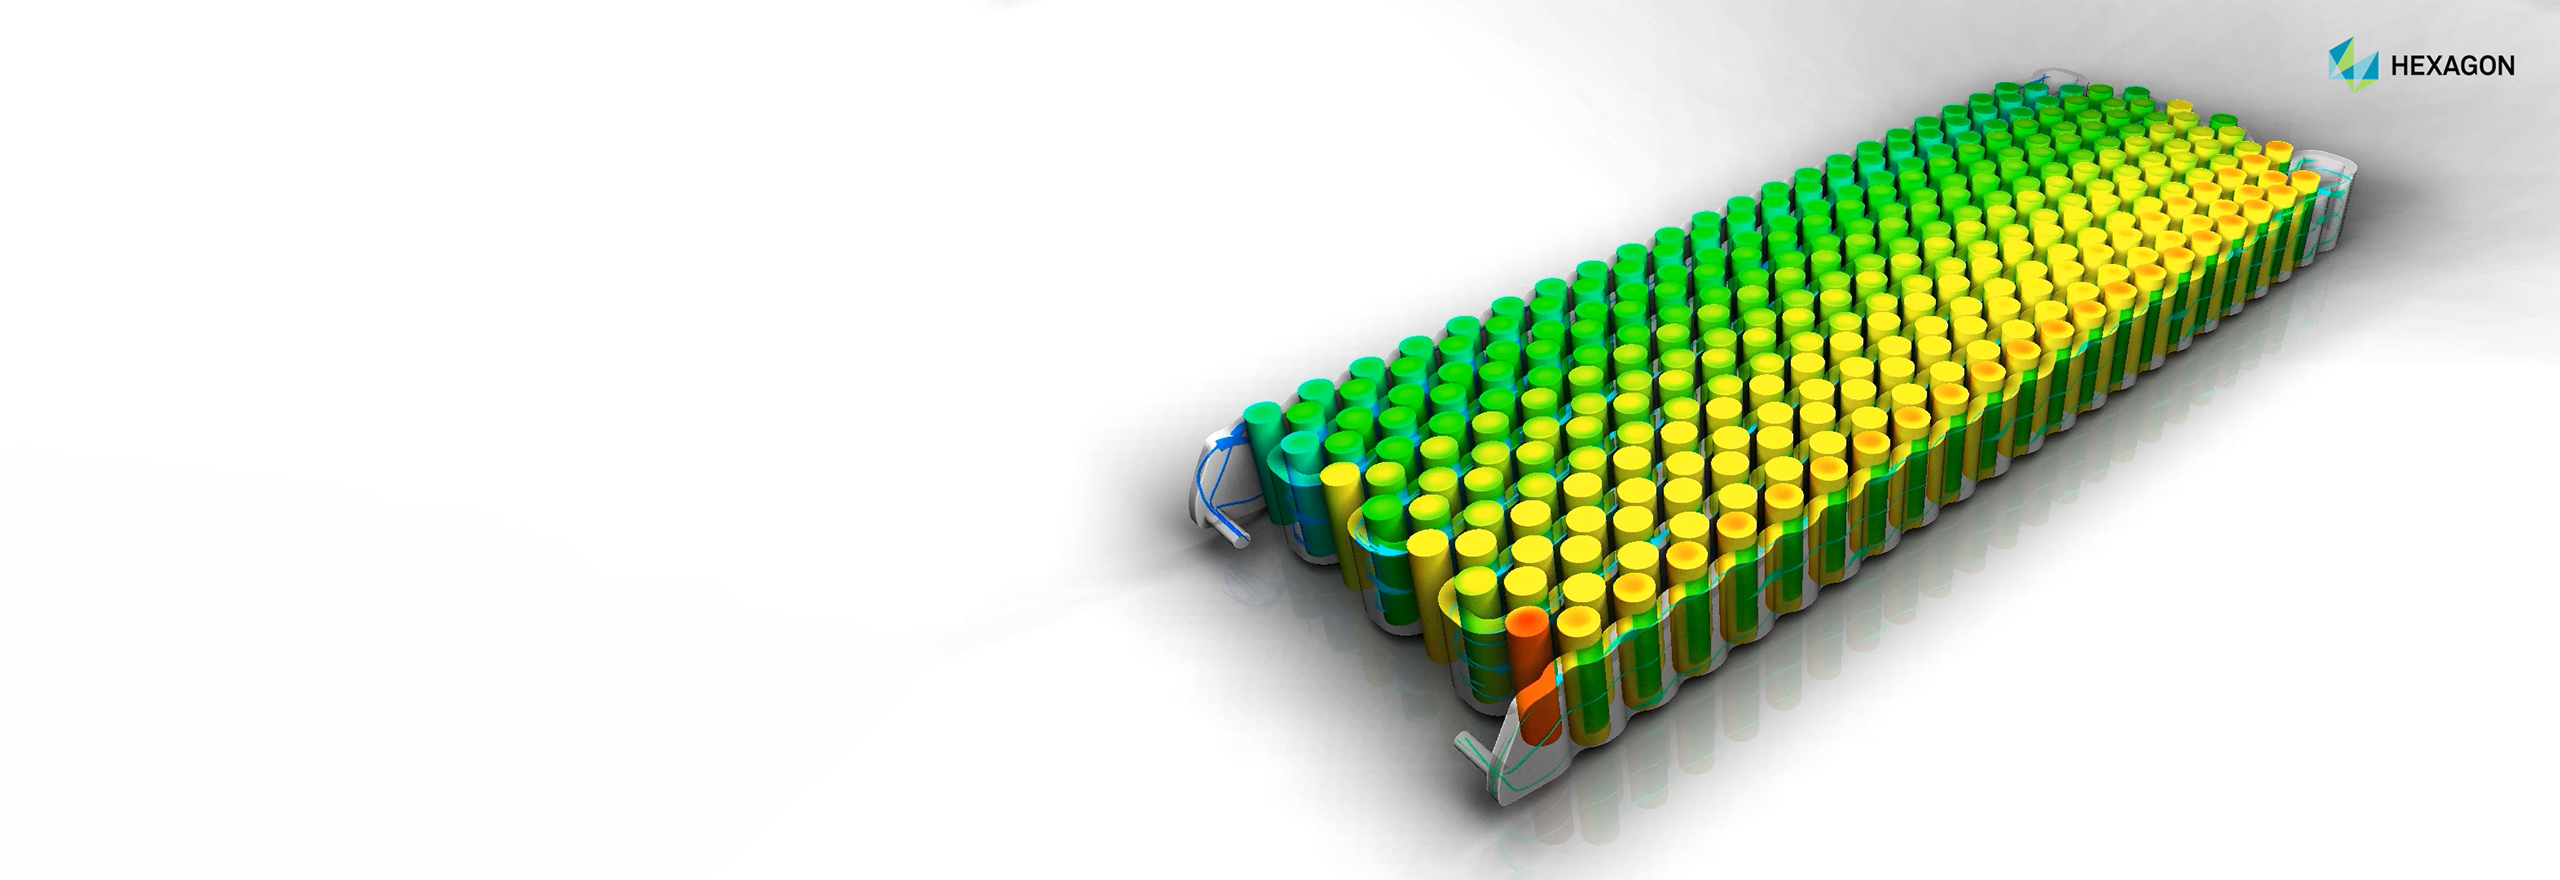 A digital simulation of a cylindrical EV battery cooling down, with colours representing different levels of heat, from green to yellow